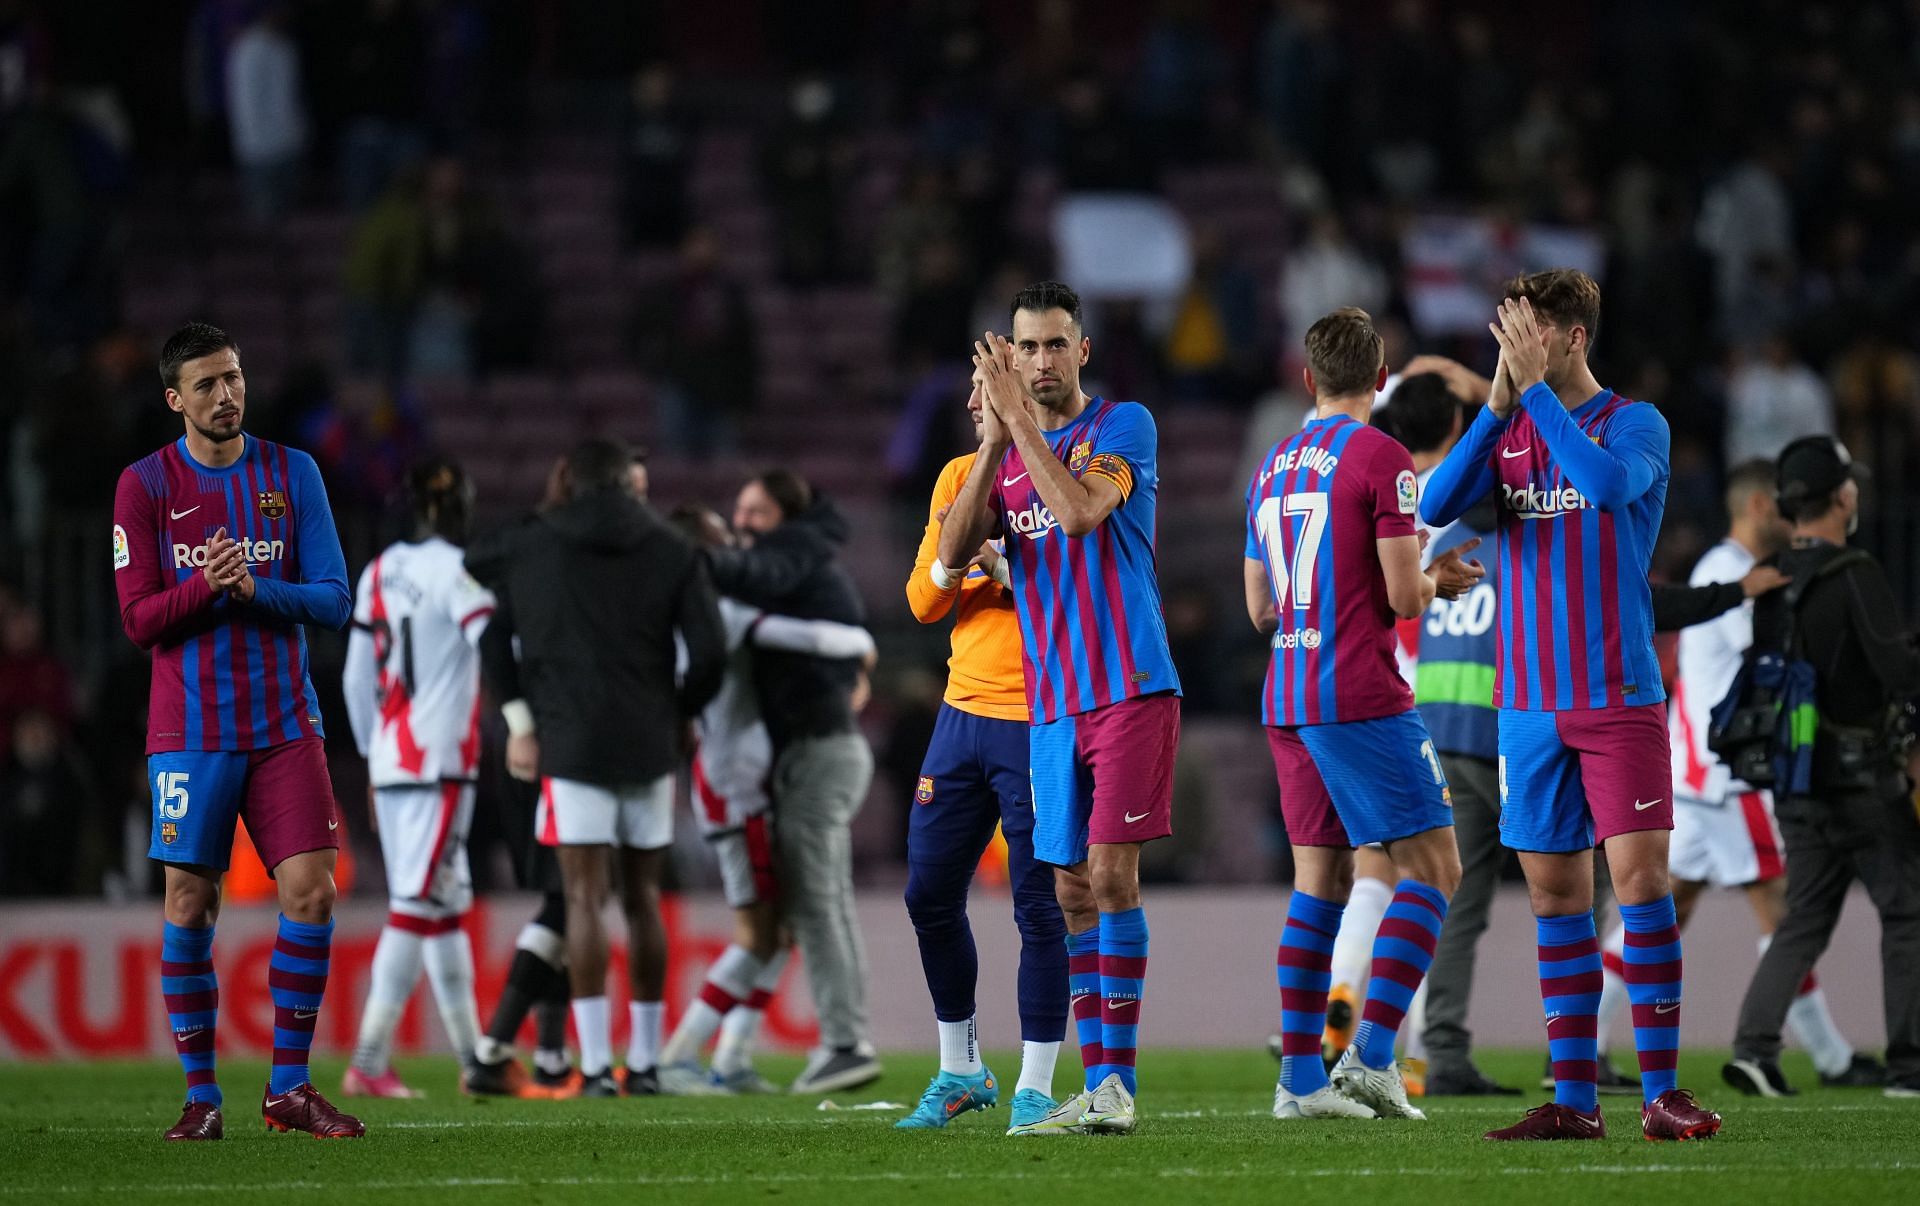 Barcelona need to add more quality to their ranks this summer after a disappointing 2021-22 season.